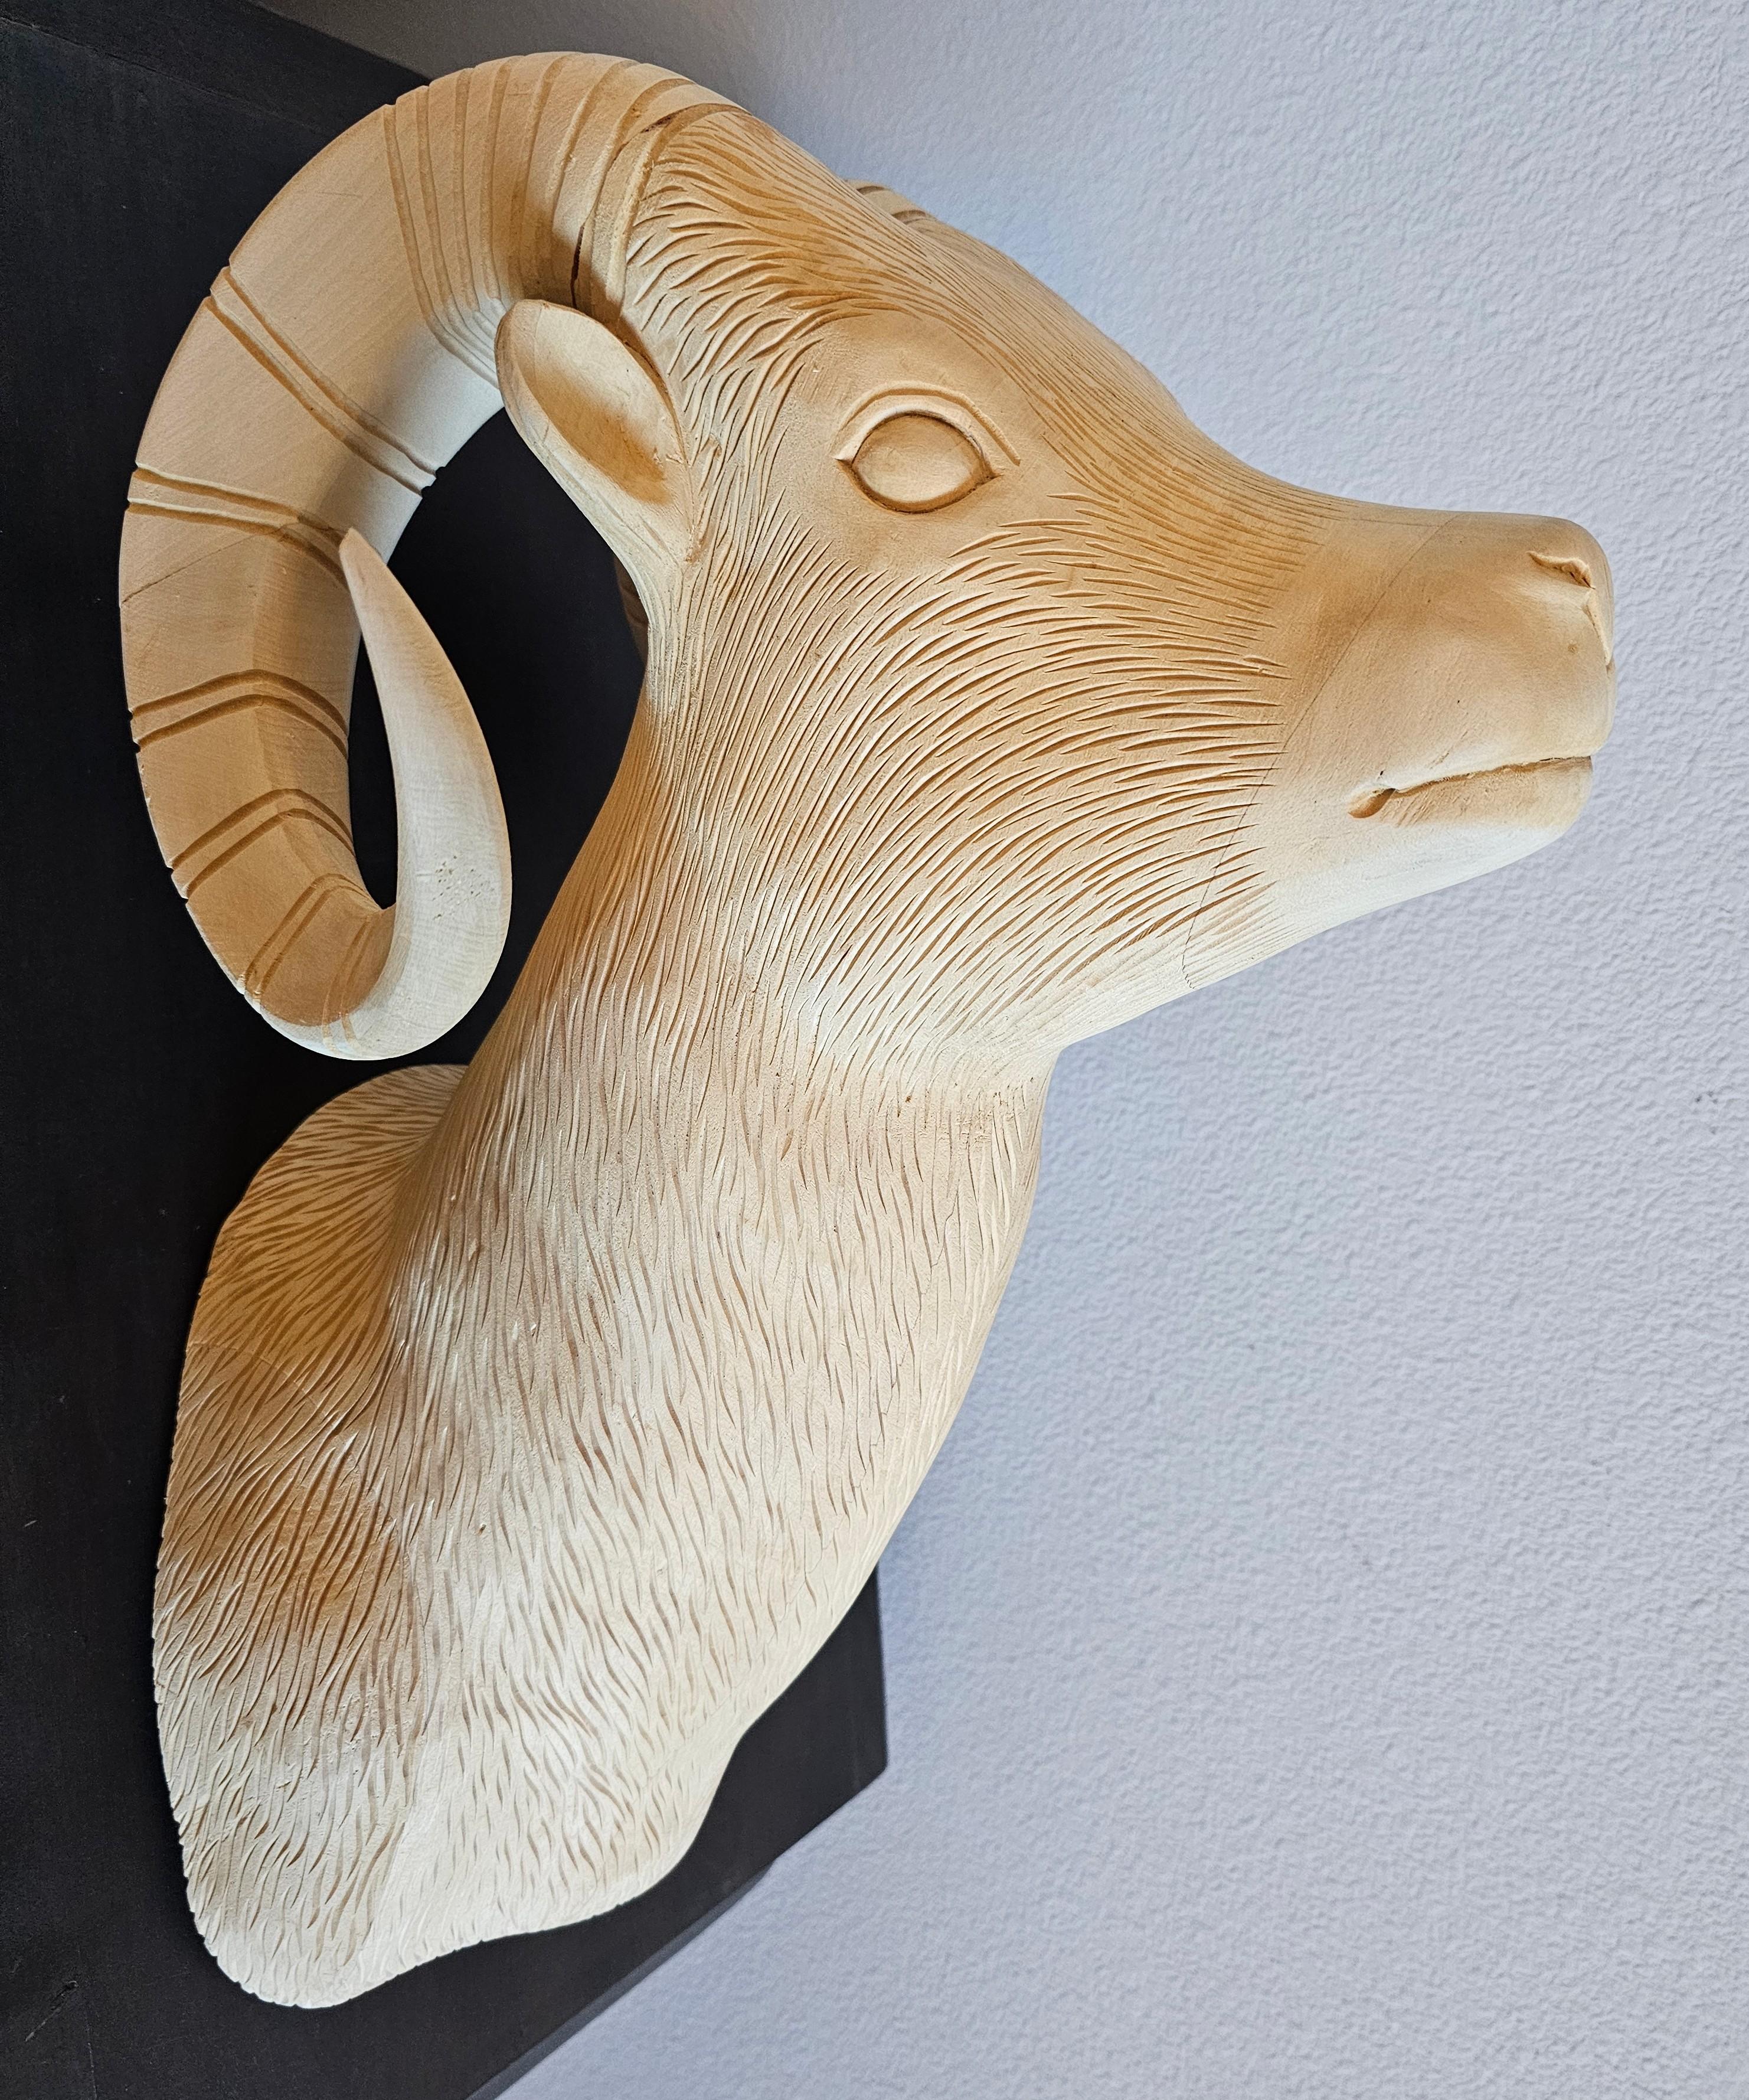 A large wooden carving modeled after a long horn sheep head shoulder mount. Exceptionally executed naturalistic form, stripped / bleached light wood, intricately detailed to imitate fur, facial features, muscular depth and texture to horns. Equipped